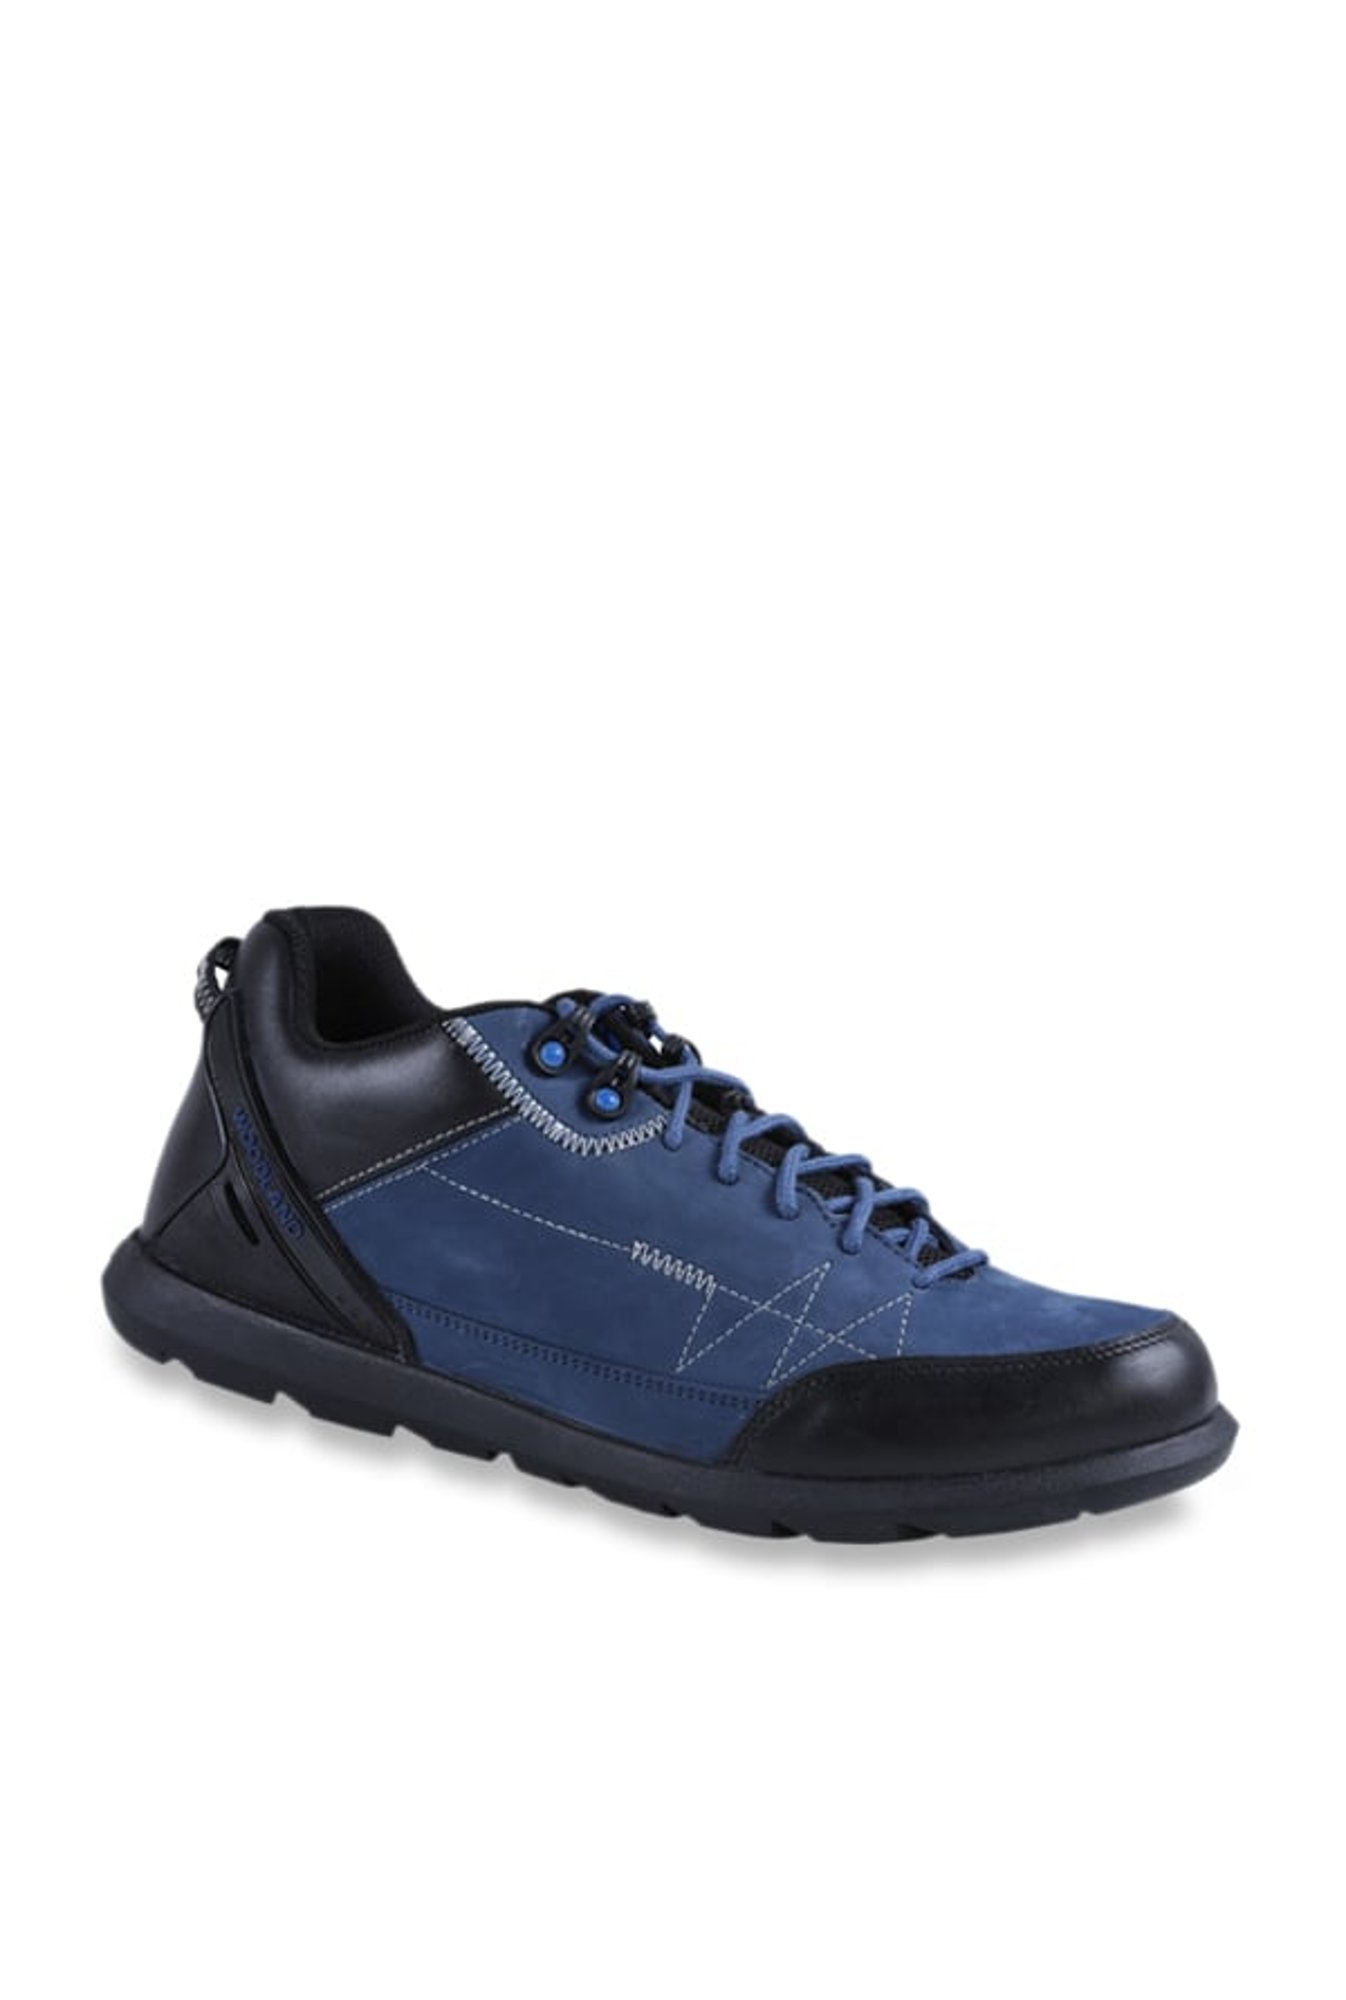 woodland navy blue sneakers